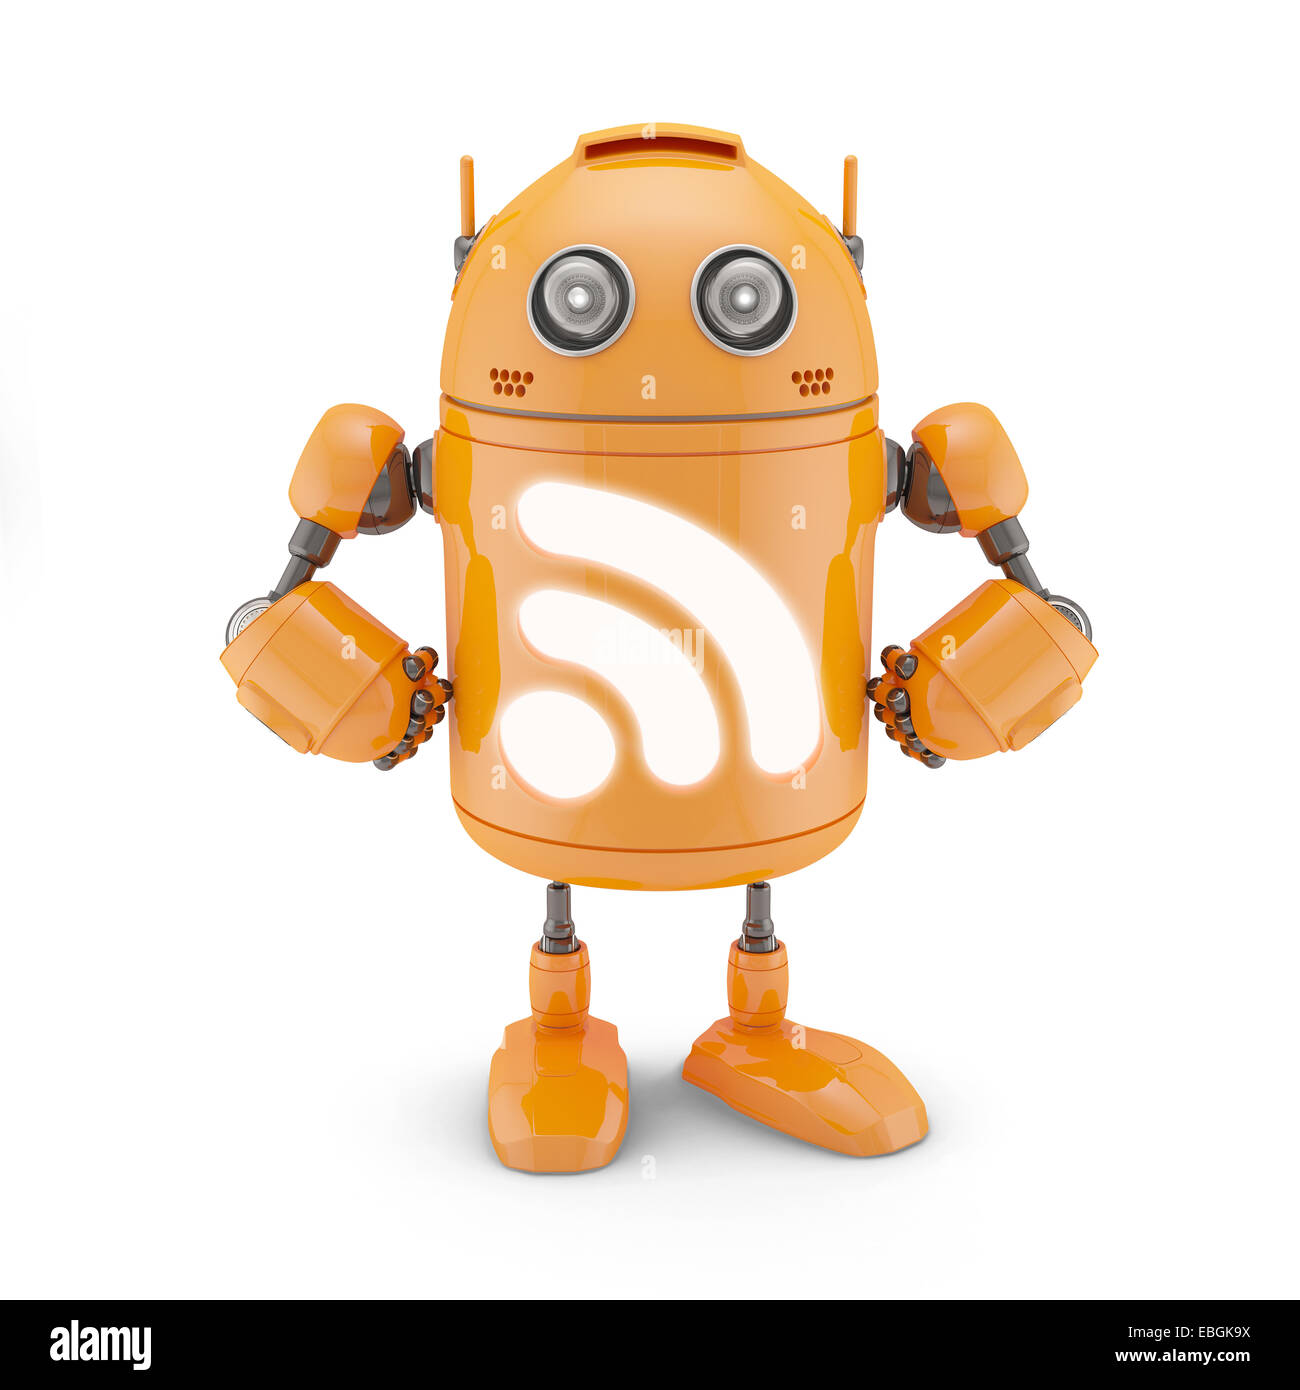 RSS icon robot. Isolated on white background Stock Photo